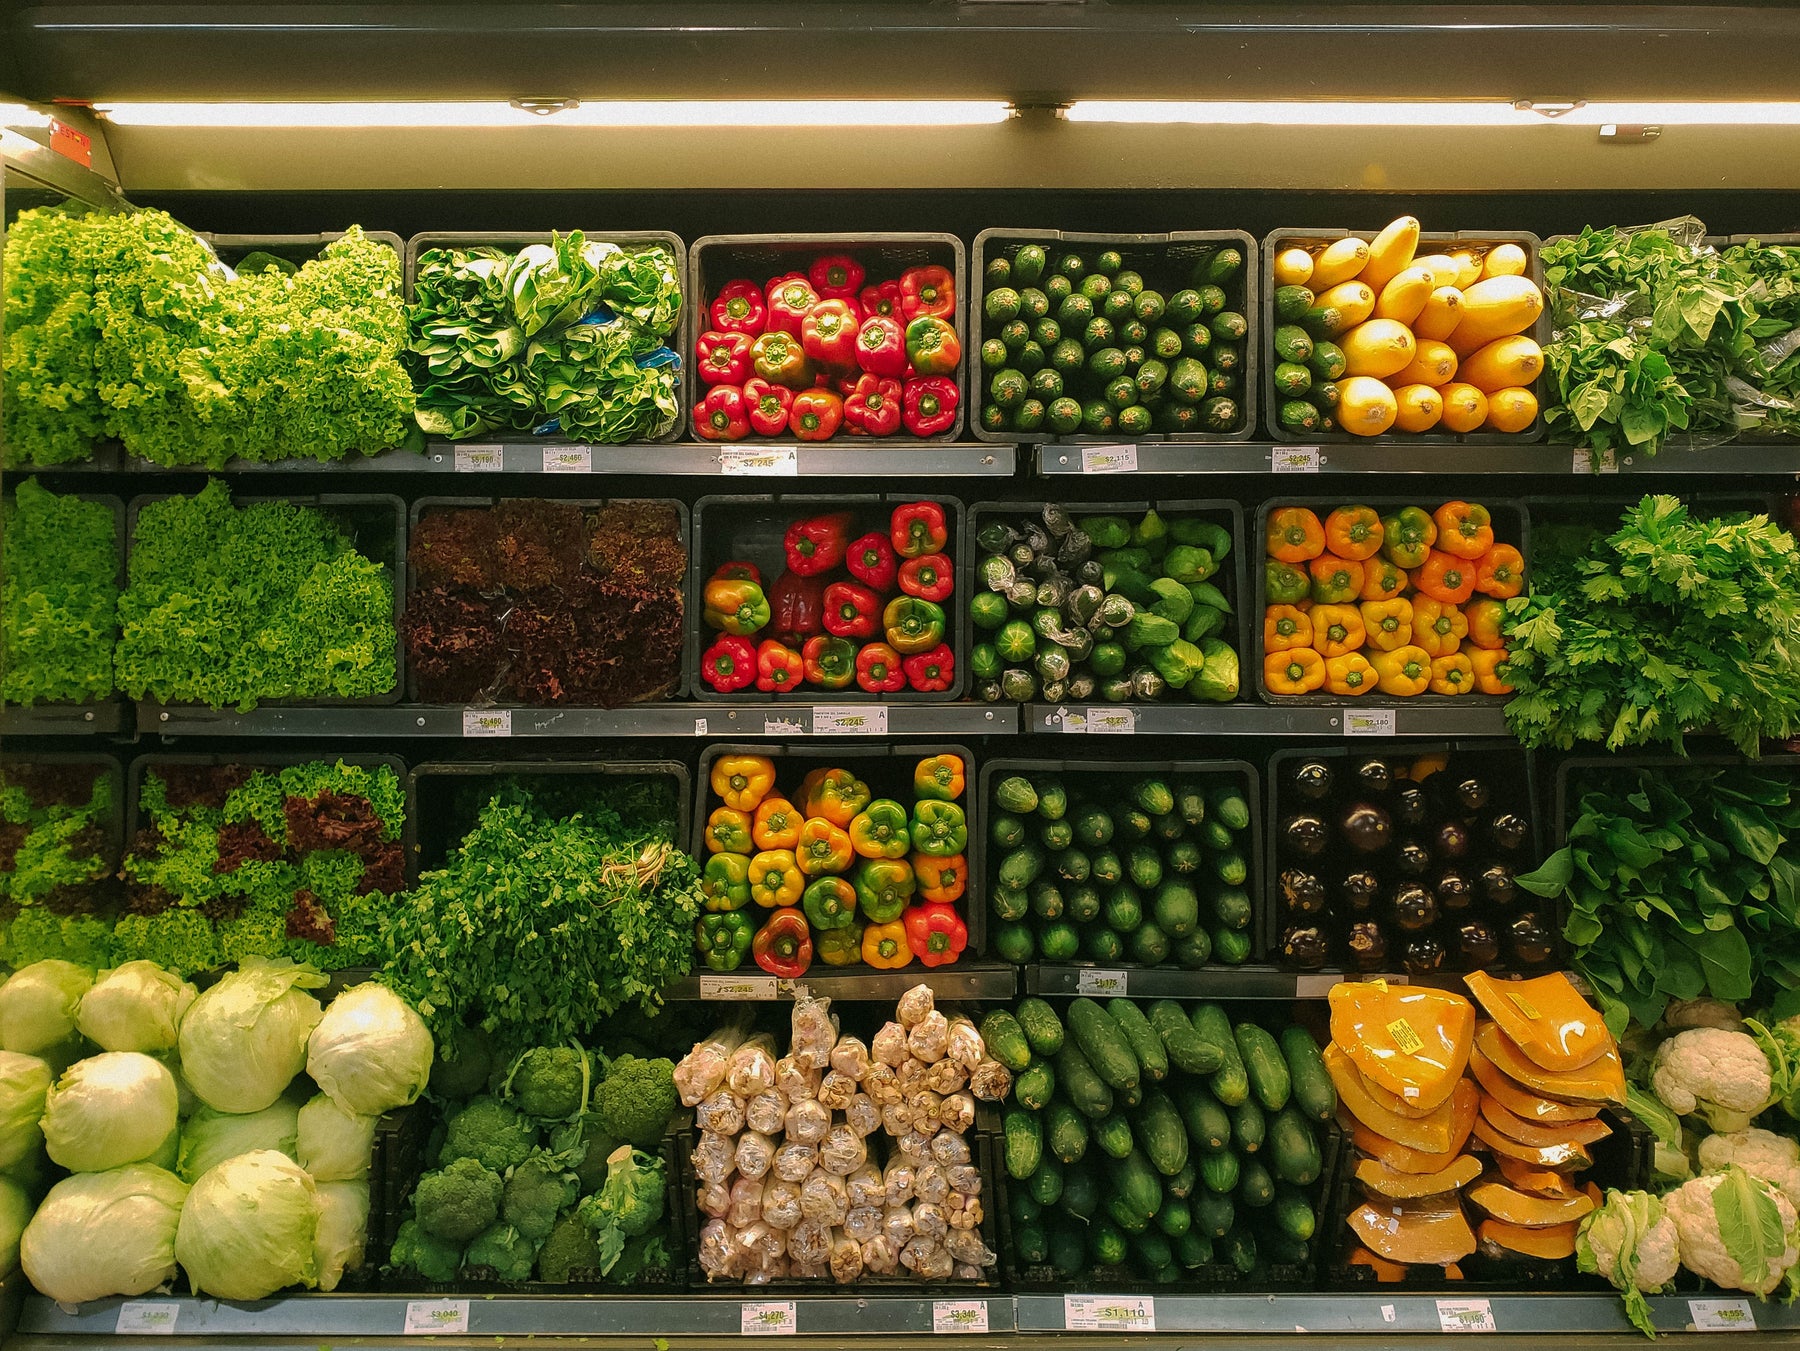 WHY YOU SHOULD SHOP AT BULK FOOD STORES